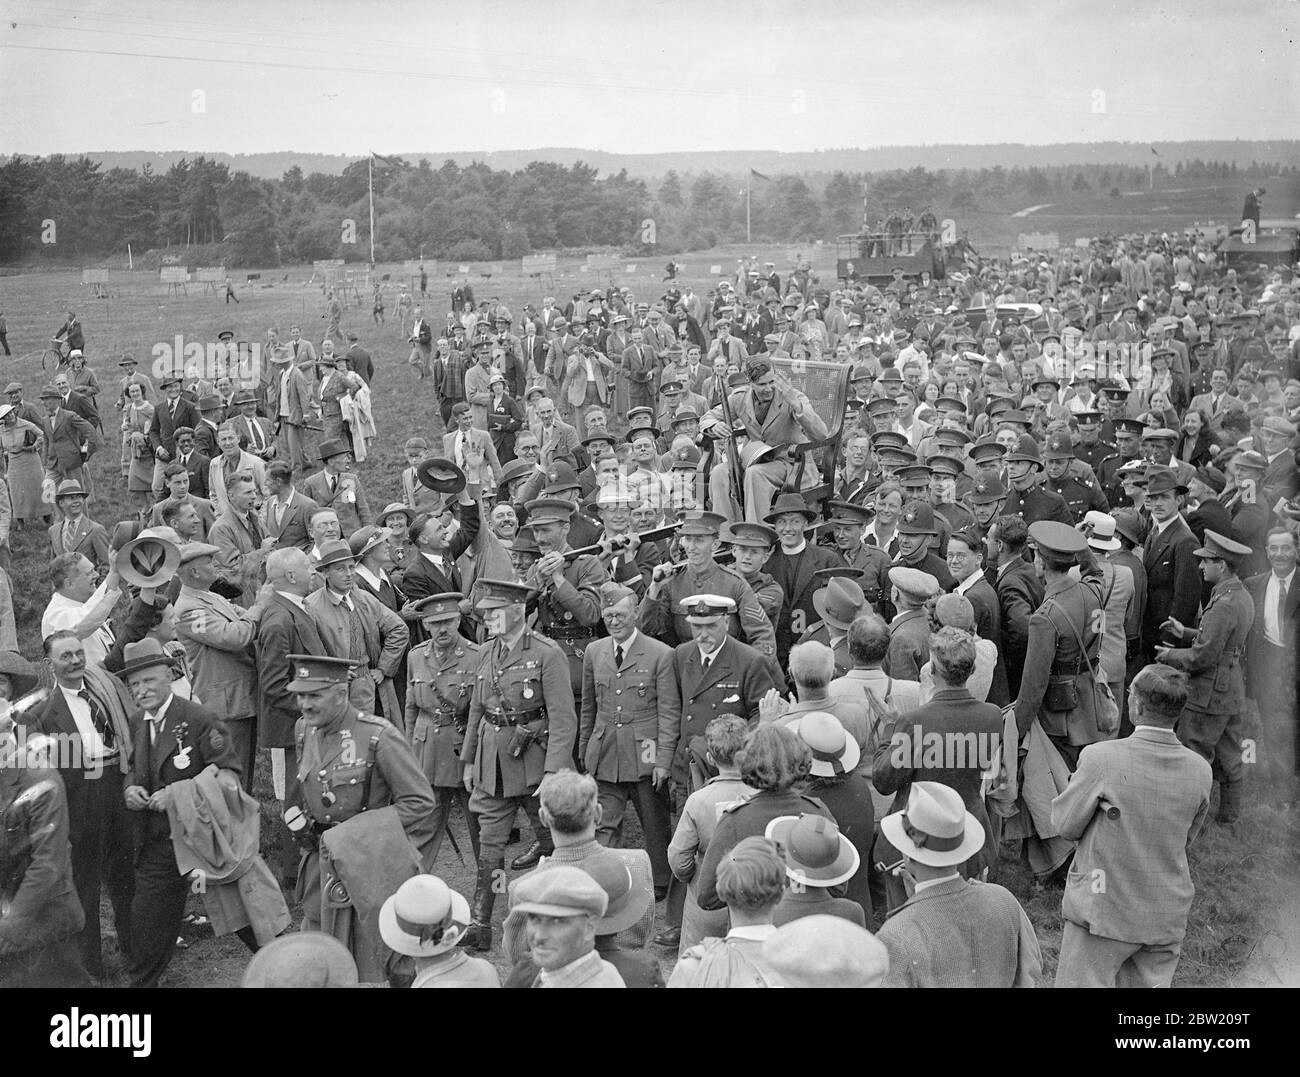 Officer-cadet D. L. Birney been chaired after his victory at Bisley where he won the King's Prize, the premier award, with an aggregate of 283 points. 17 July 1937 Stock Photo